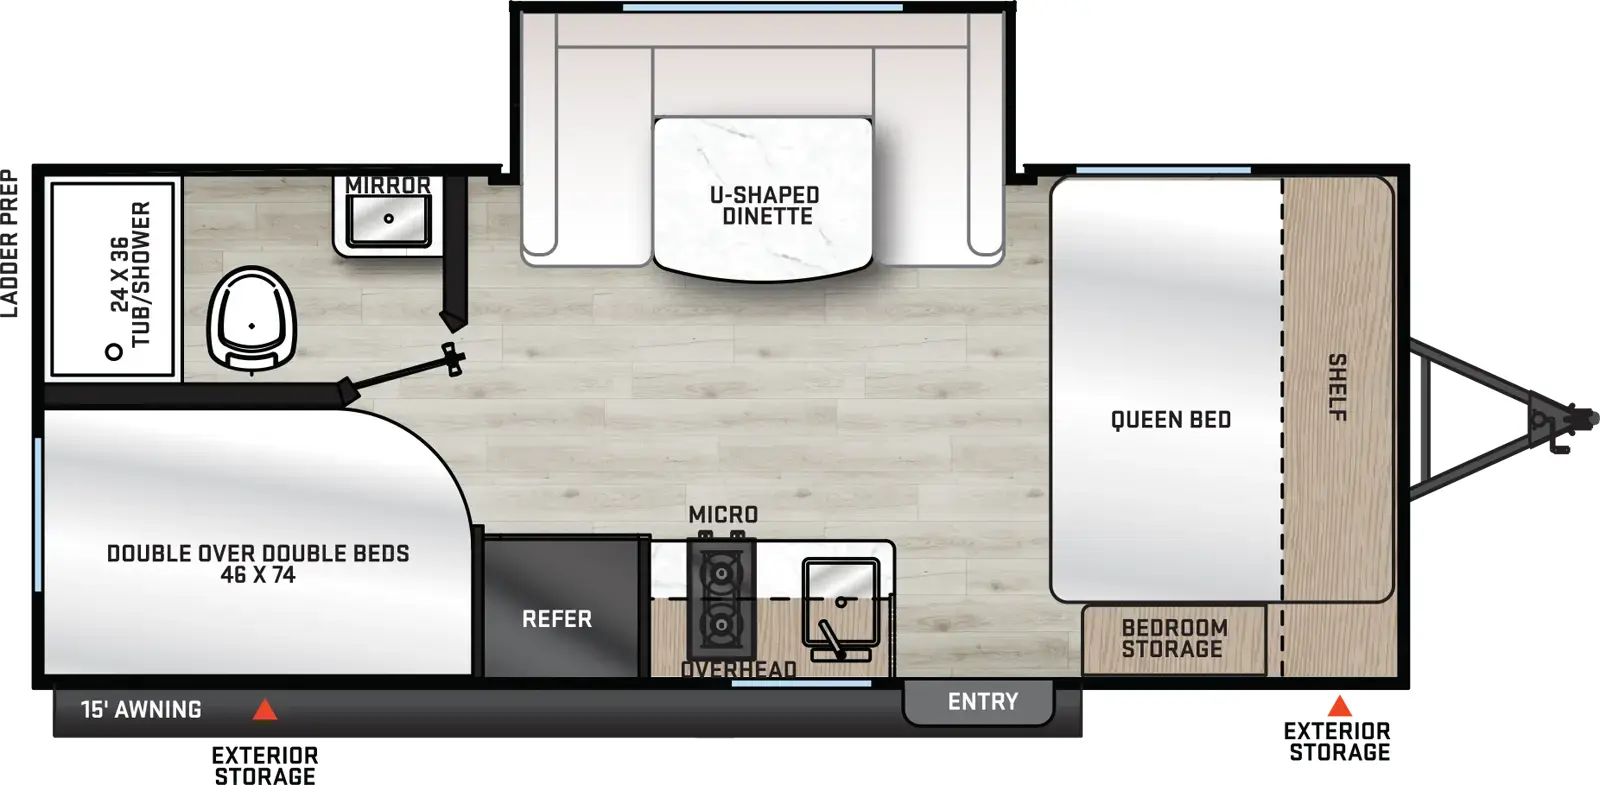 The 184BHSX has one slide out and one entry. Exterior features outside storage, 15 foot awning, and rear ladder prep. Interior layout front to back: side-facing queen bed with overhead shelf and door-side storage; off-door side u-dinette slideout; door side entry, sink, overhead cabinet, cook top, microwave, and refrigerator; rear off-door side full bathroom; rear door side double over double bunks.